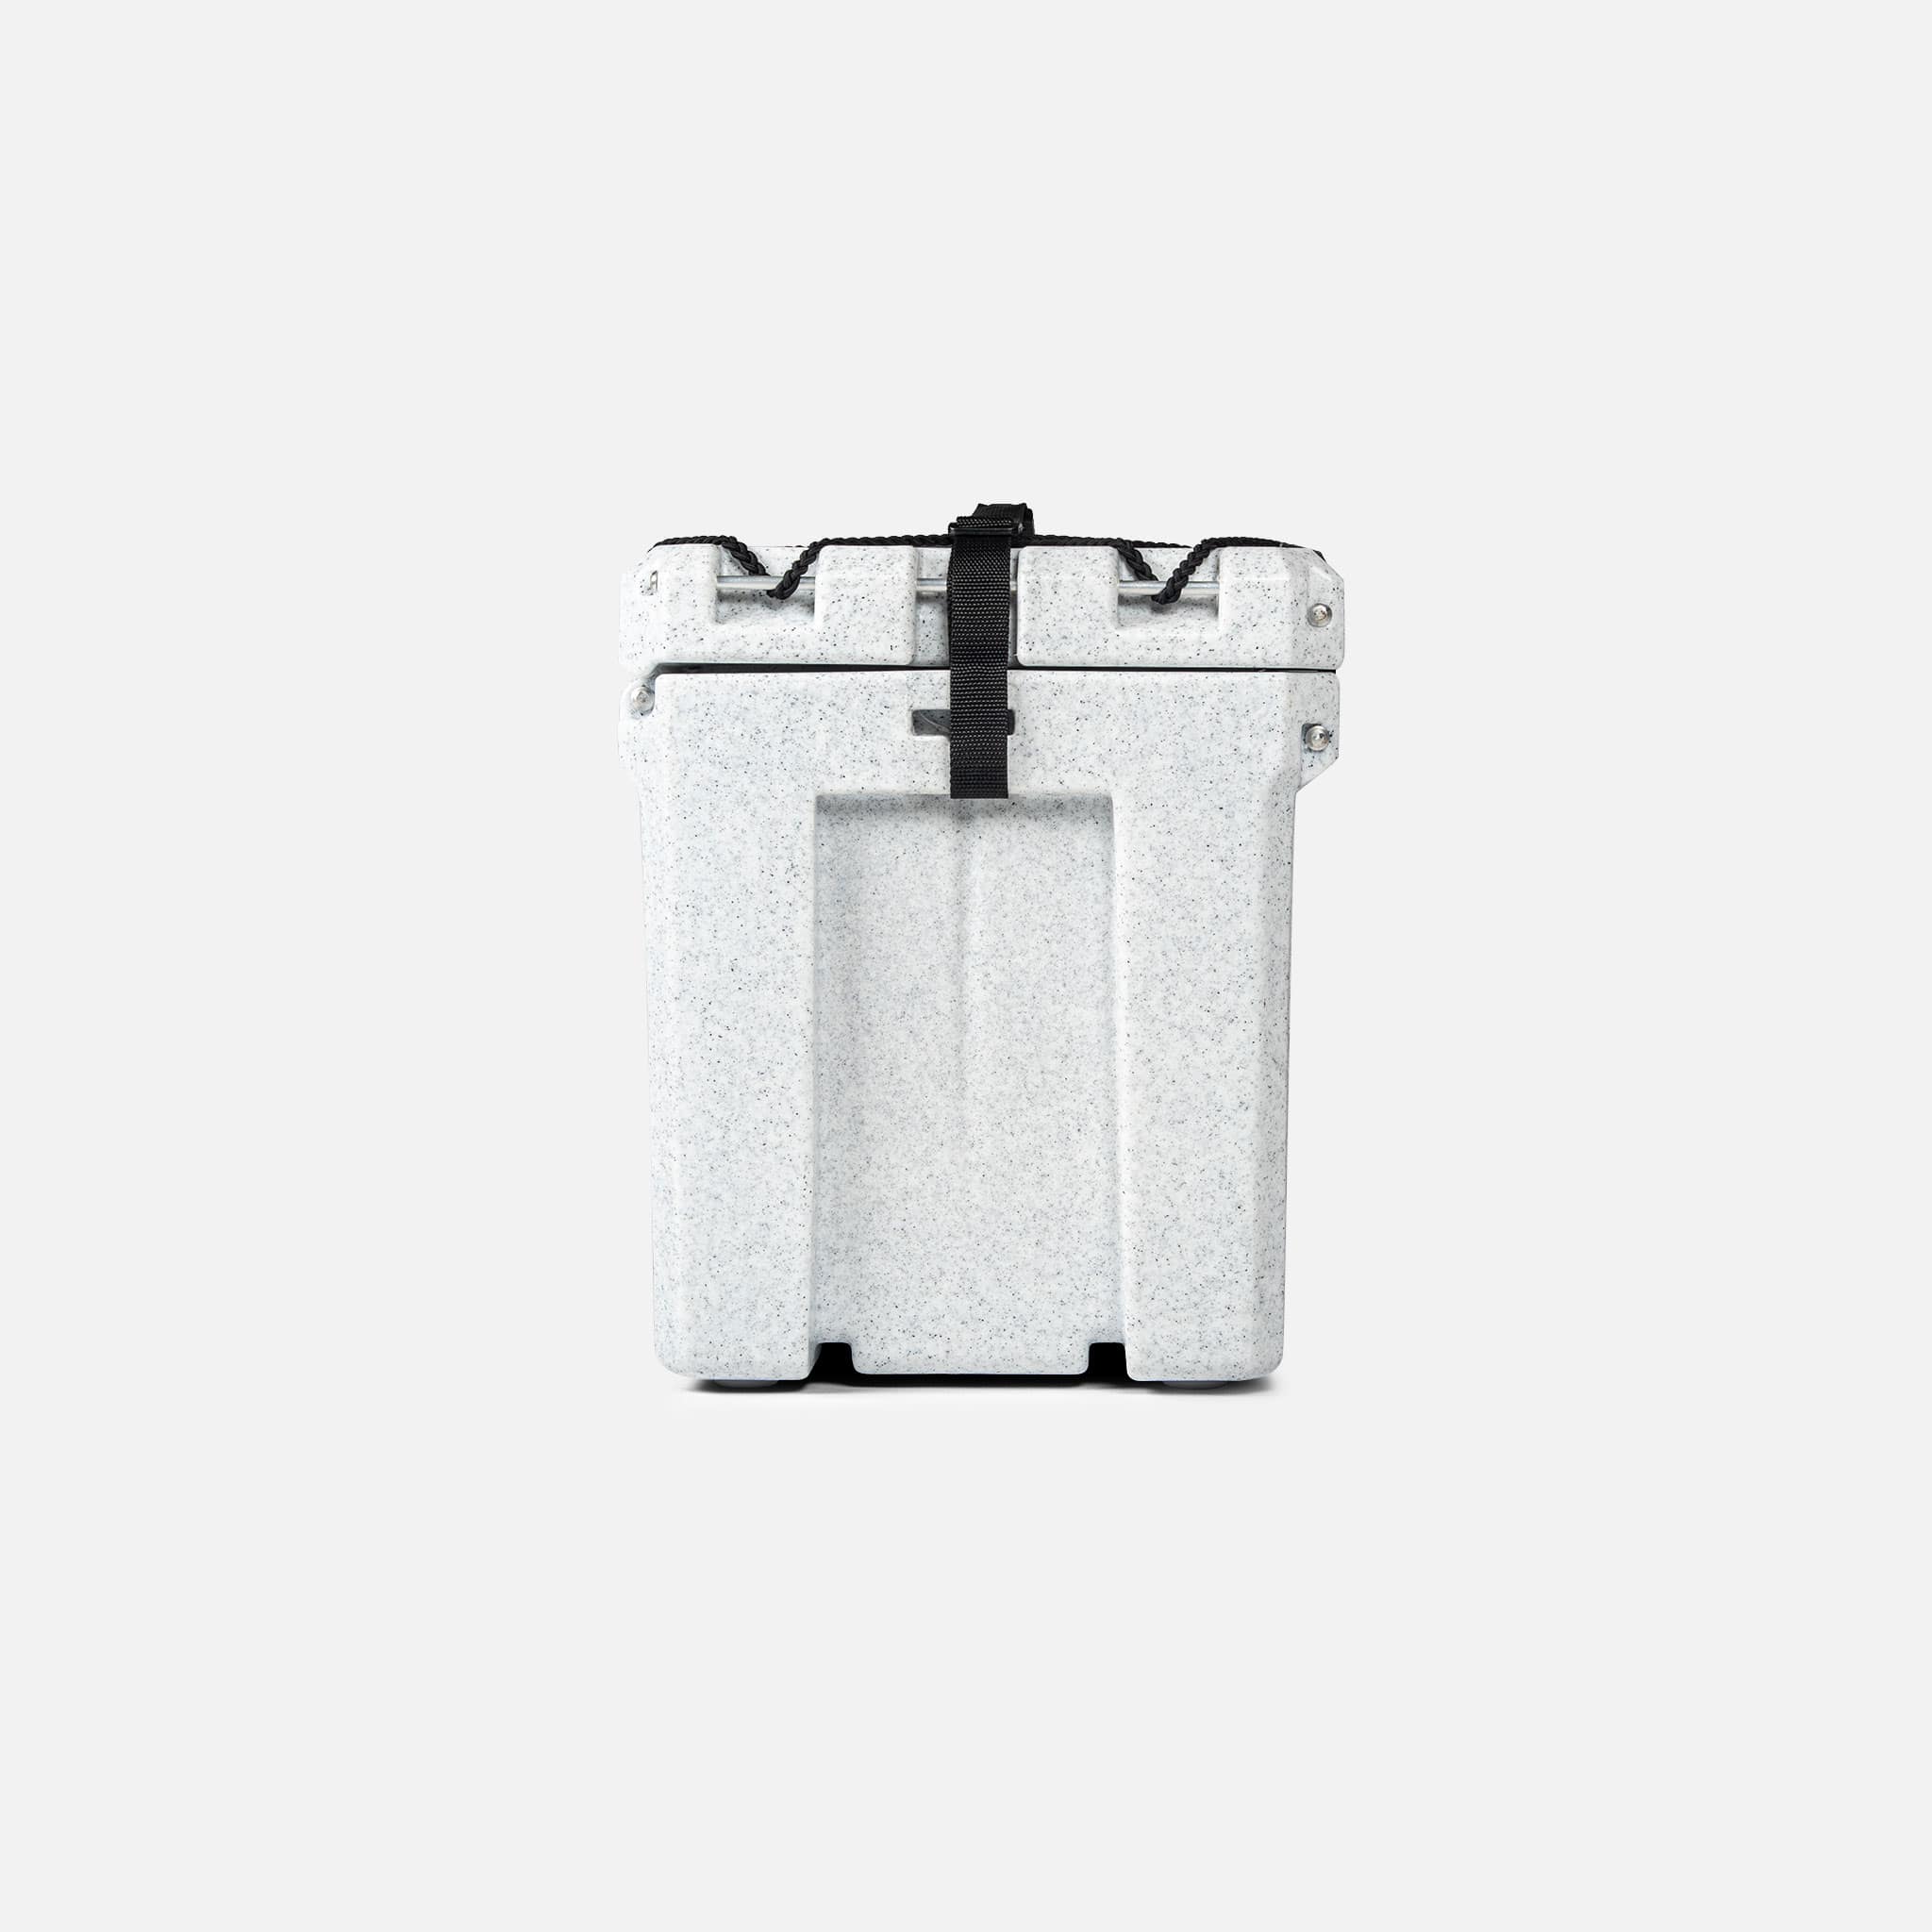 Canyon Coolers White Marble Insulated Lunch Box at